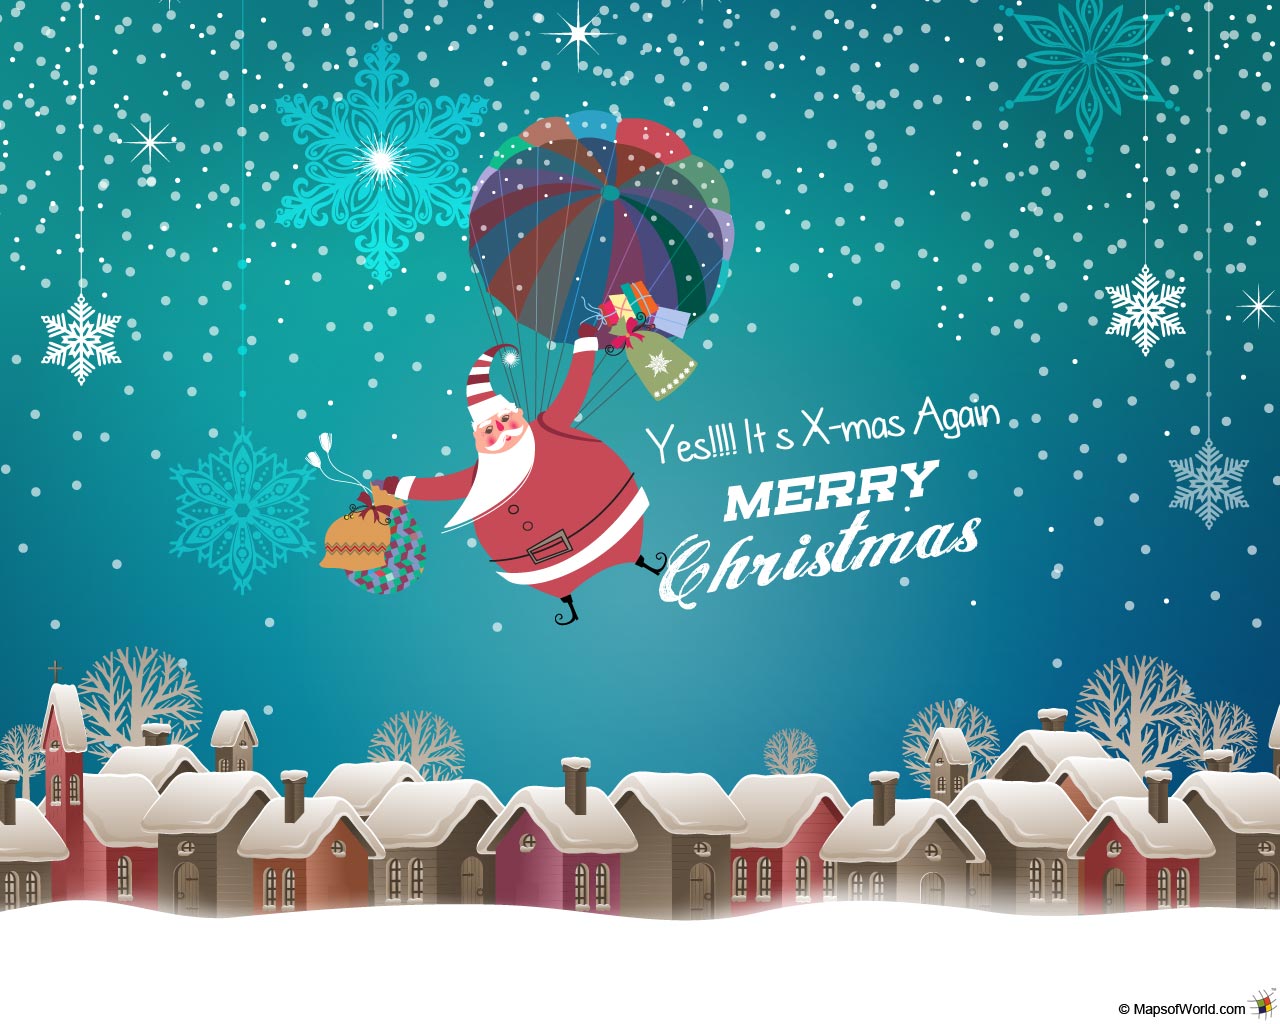 Merry Christmas Image And Wallpaper